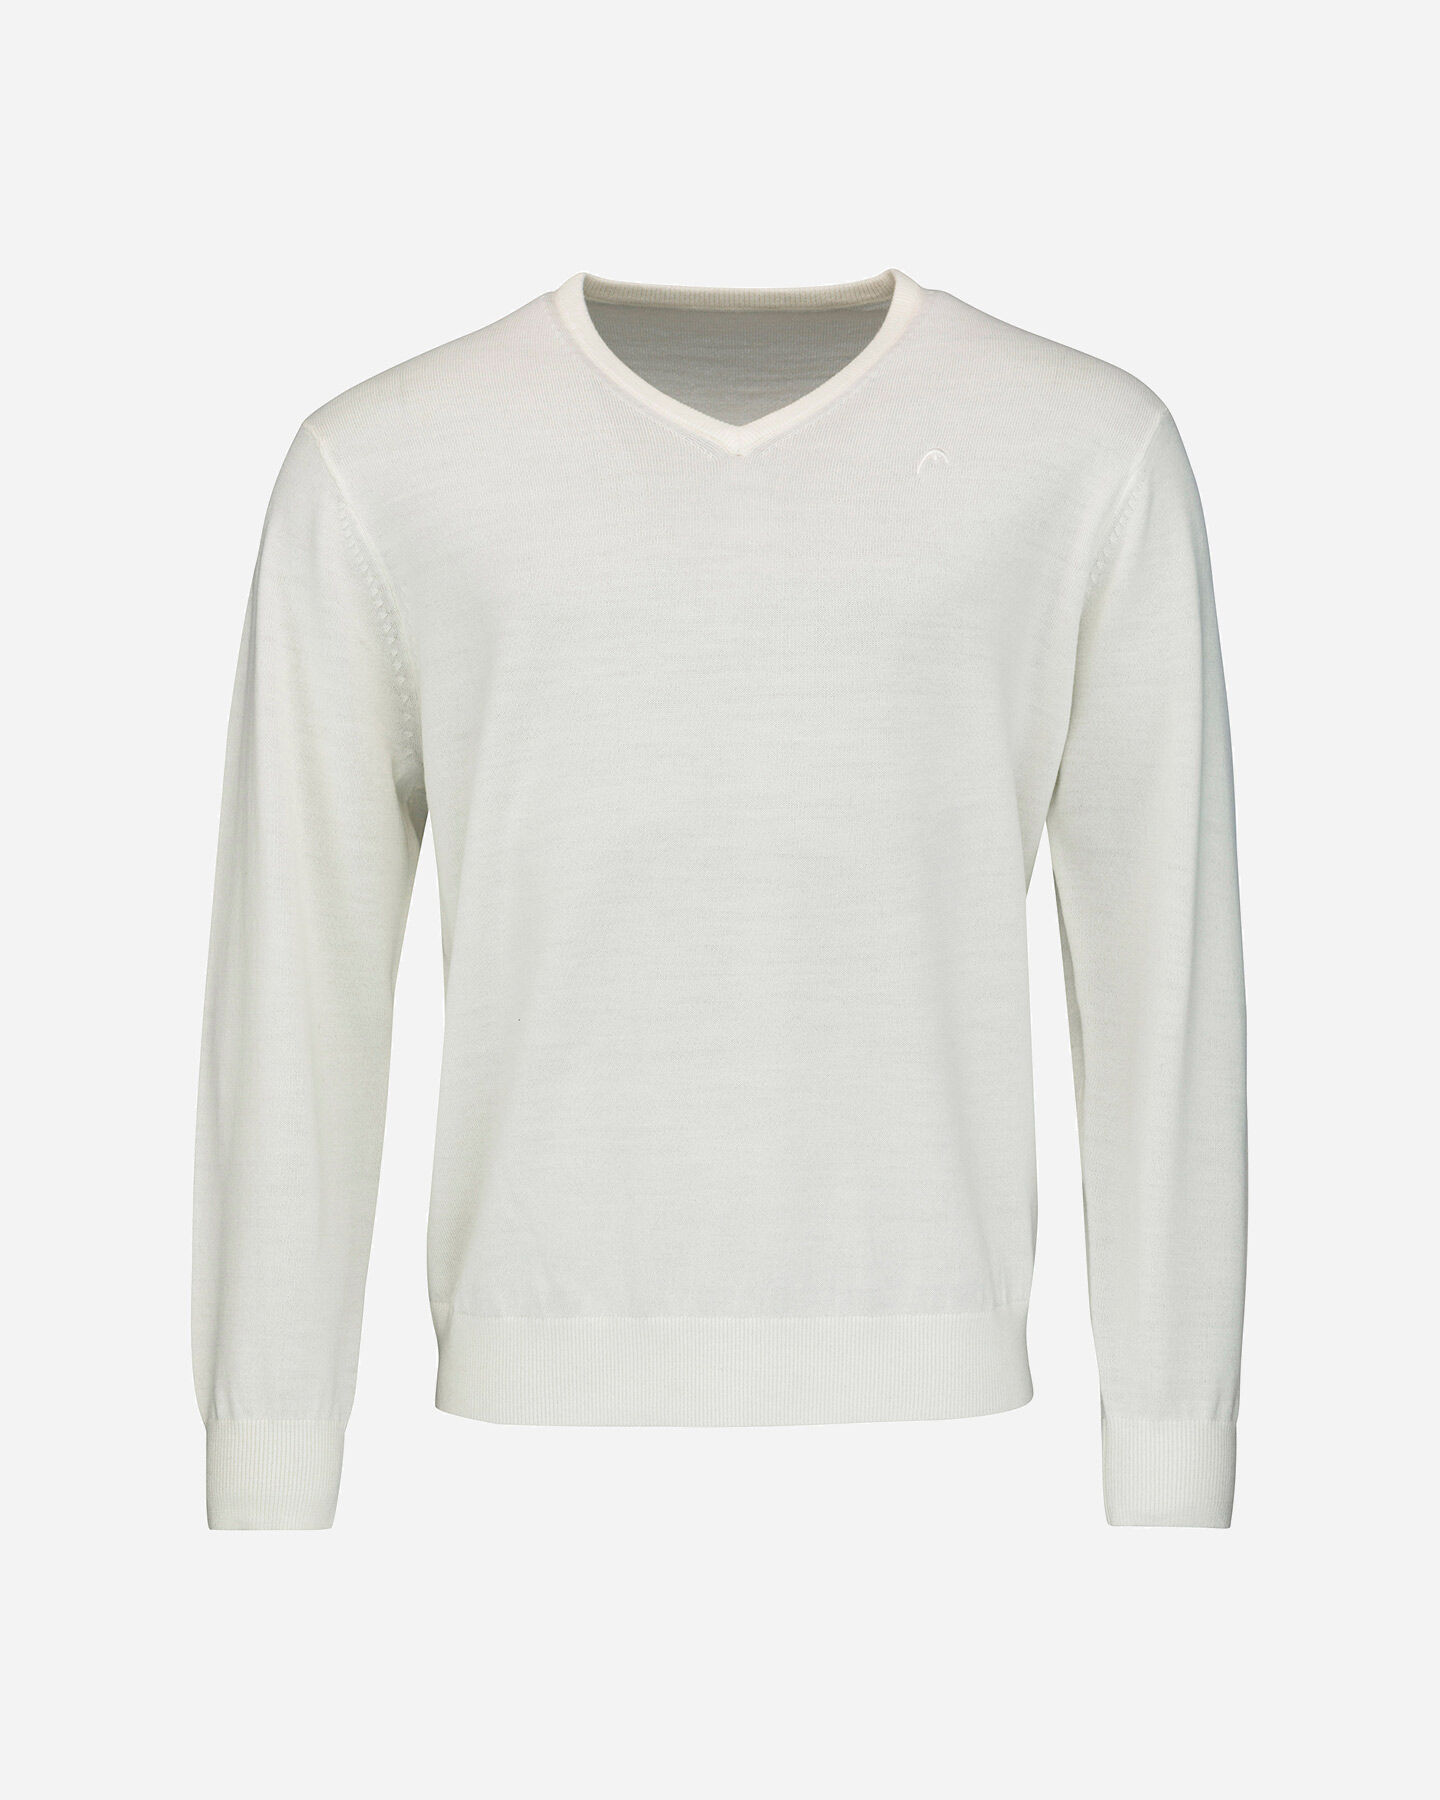  Giacca tennis HEAD PULLOVER M S5477397|WH|S scatto 0